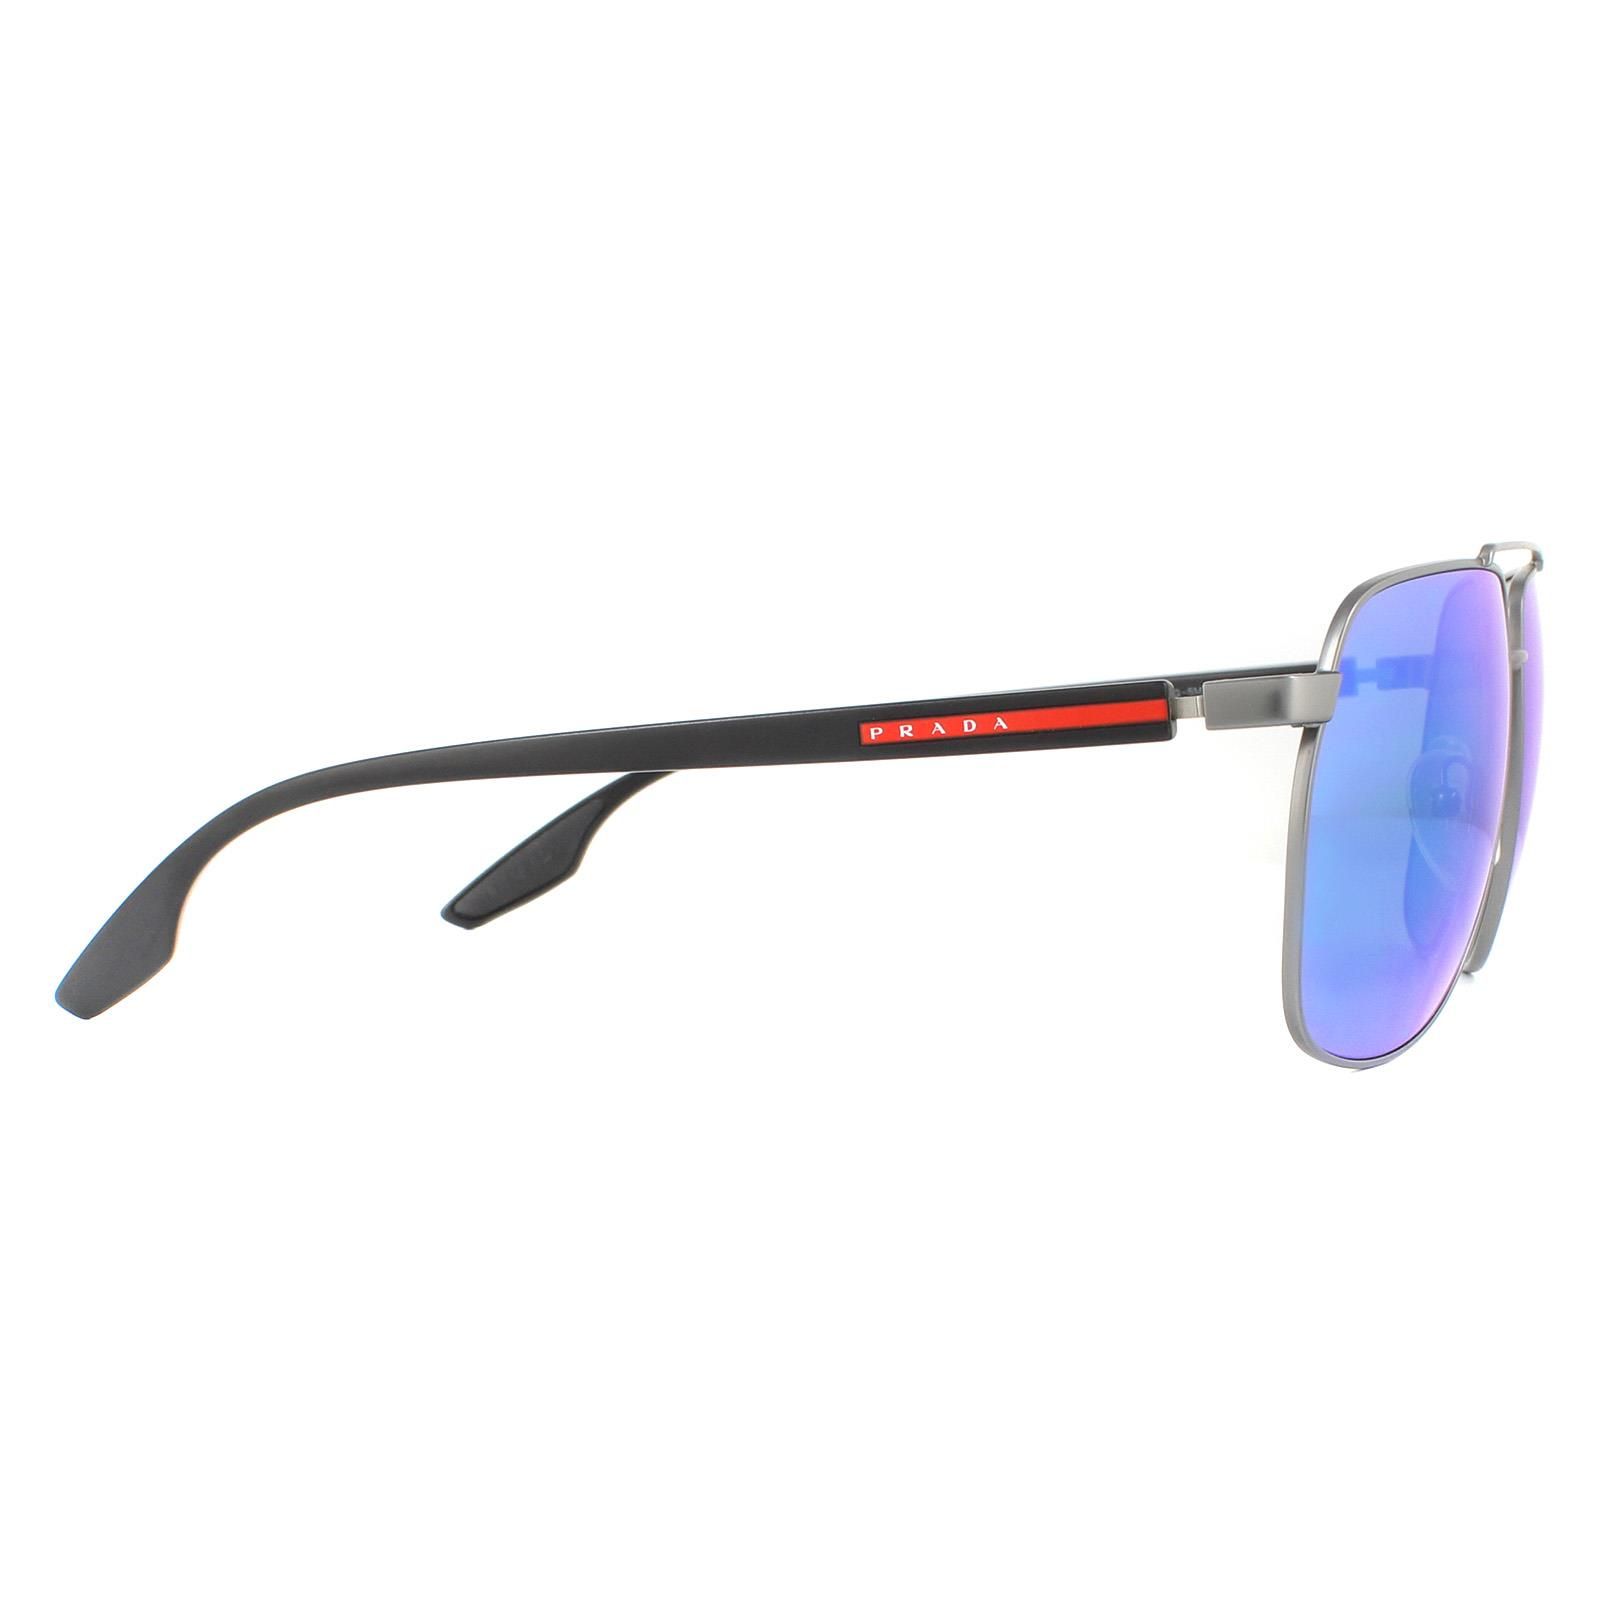 Prada Sport Sunglasses PS55VS 7CQ5M2 Matte Gunmetal Light Green Blue Mirror  are a contemporary and lightweight aviator style with a distinctive double bridge and iconic Prada Sport red stripe branding along the temples.